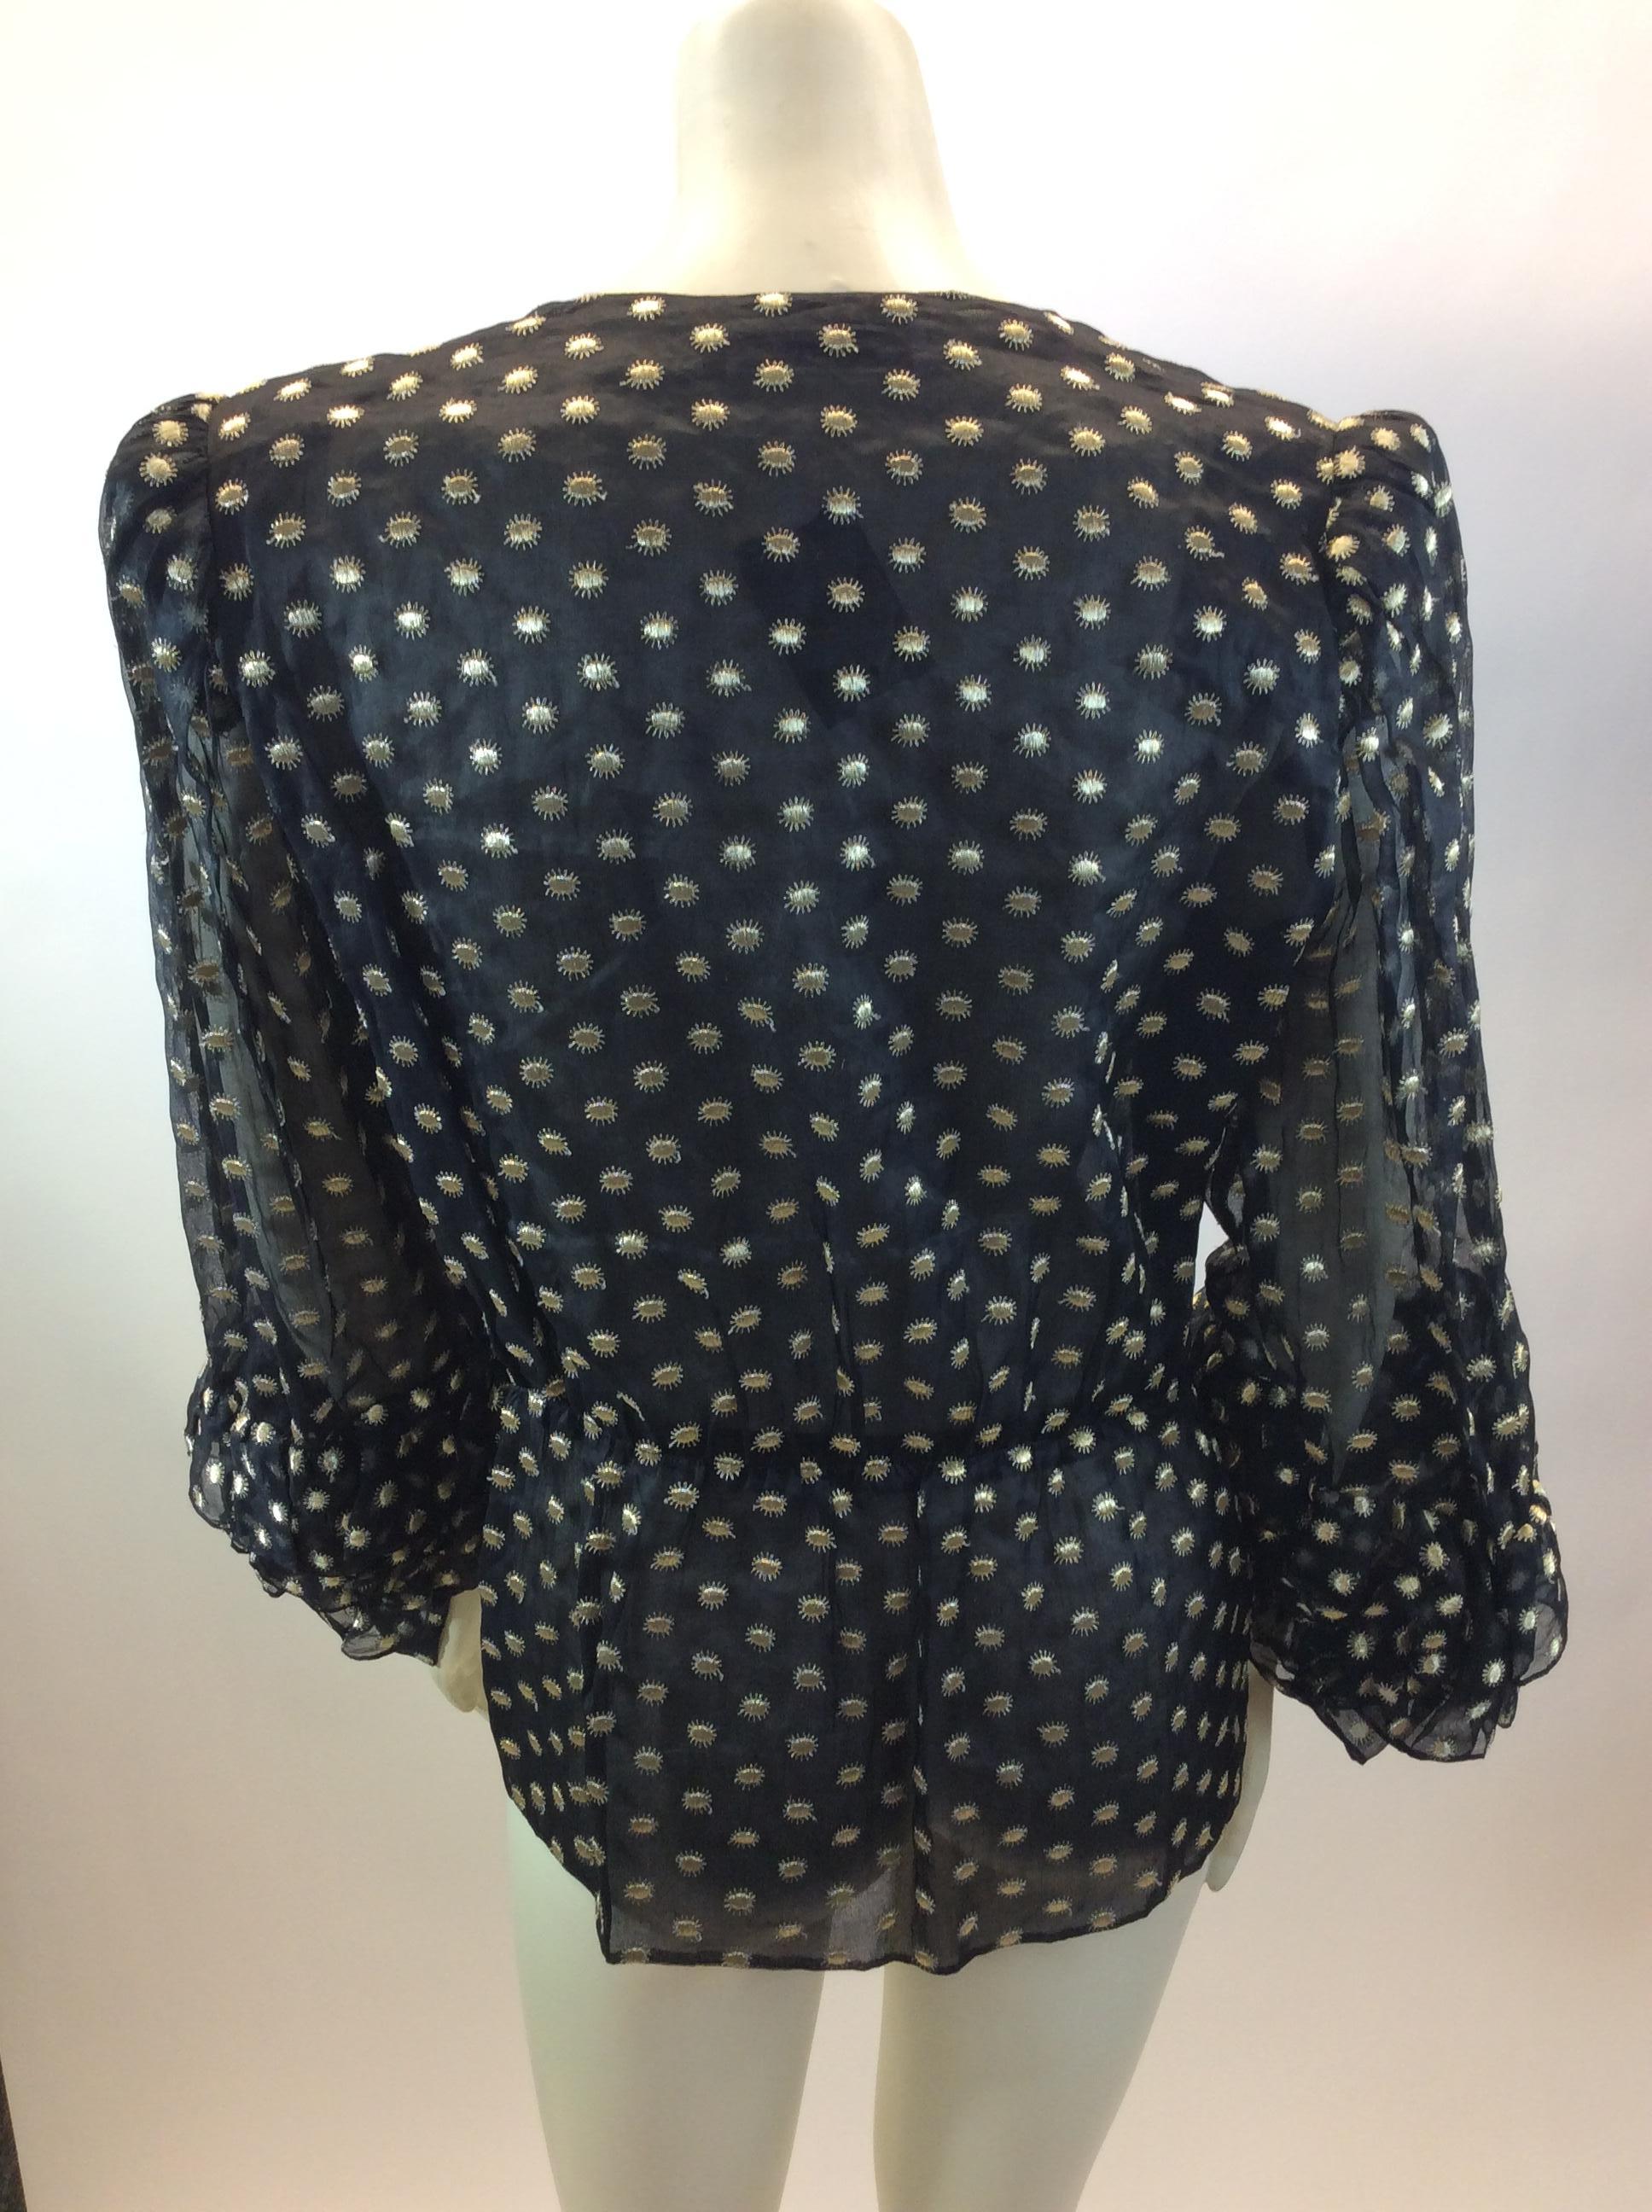 Givenchy Couture Black and Gold Print Blouse In Good Condition For Sale In Narberth, PA